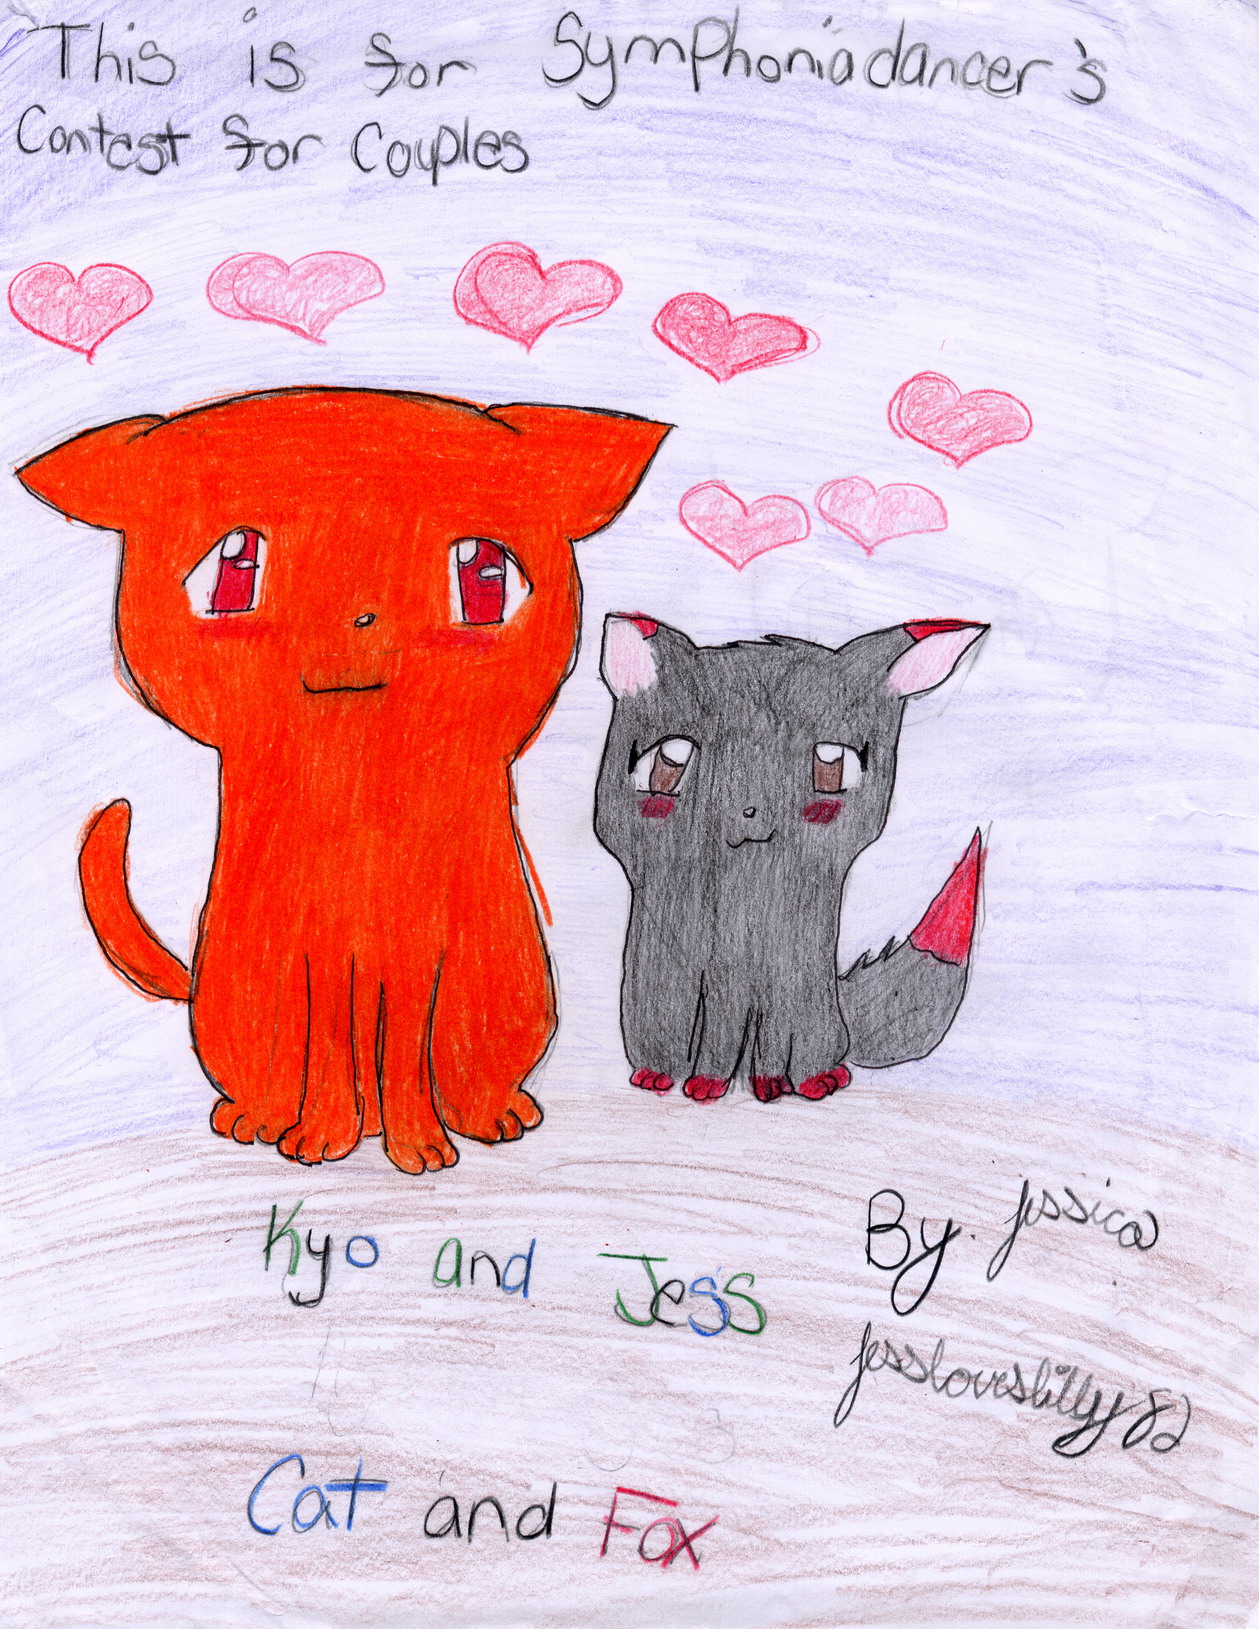 kyo and me (contest) by jesslovesbilly82